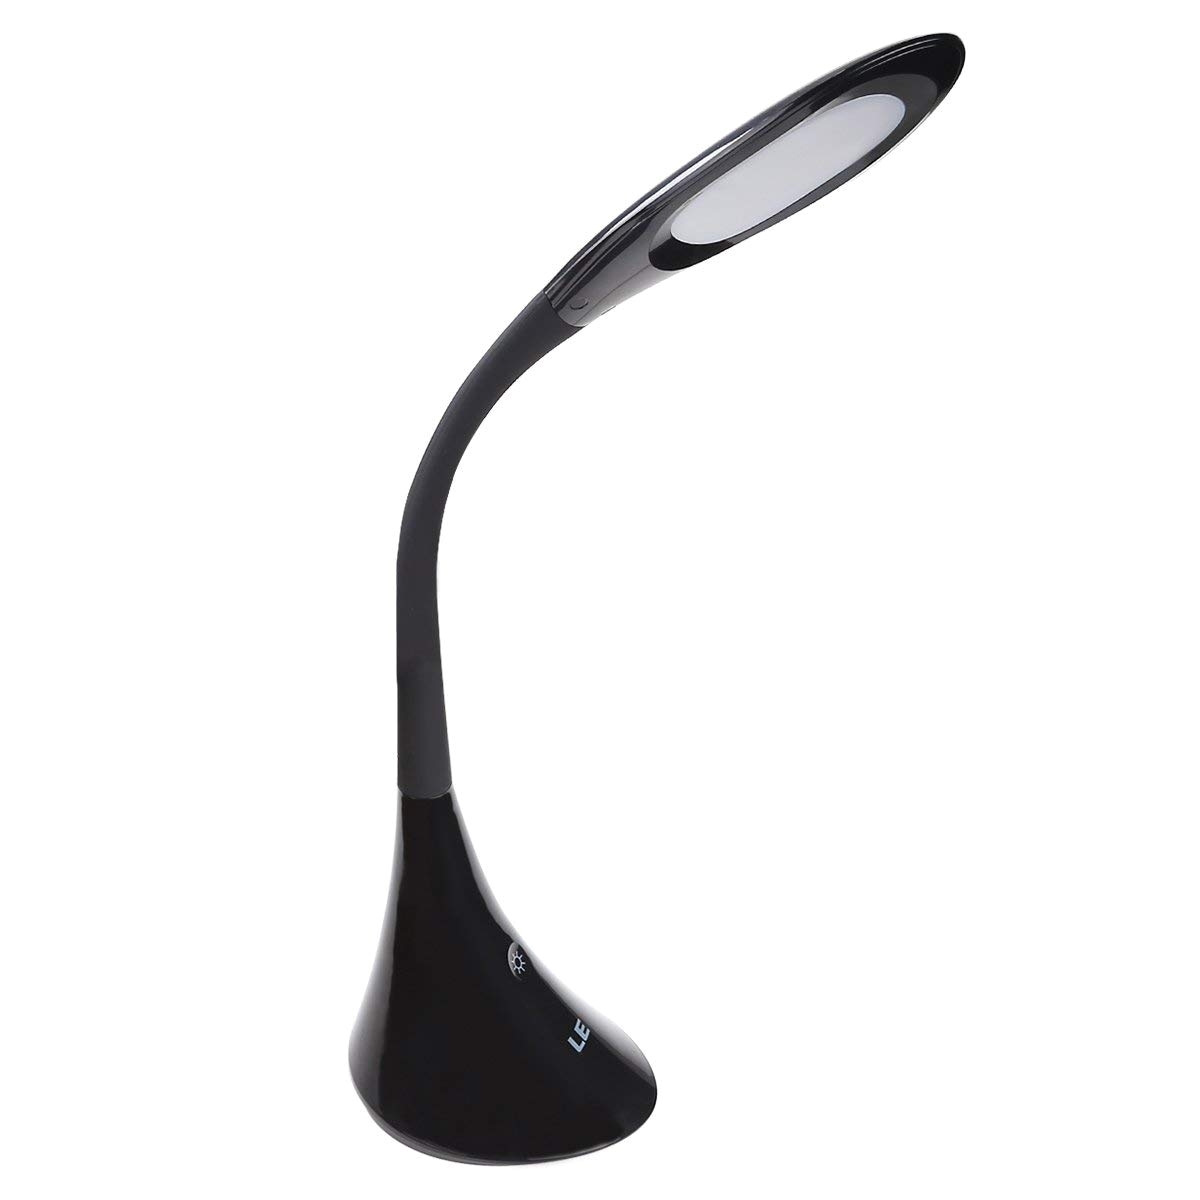 le dimmable led desk lamp 3 brightness levels usb output function eye protection design reading lamp touch sensitive control table lamp bedroom lamp